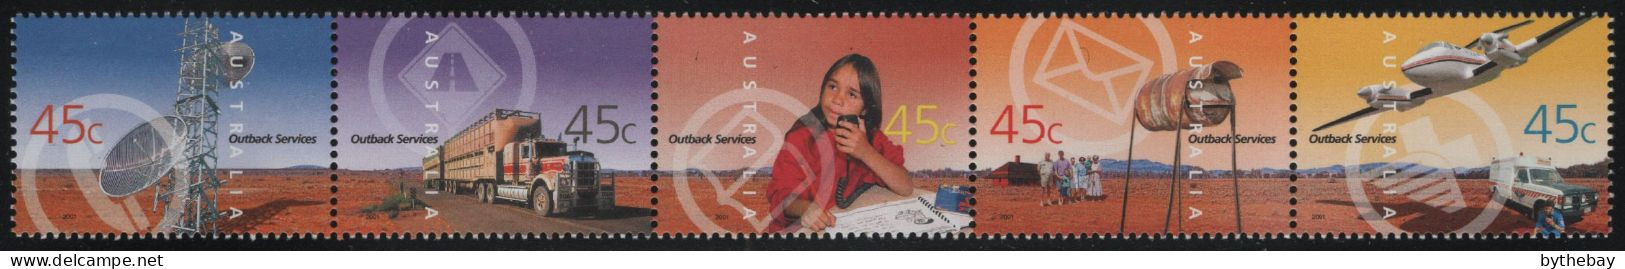 Australia 2001 MNH Sc 1966a 45c Outback Services Strip Of 5 - Mint Stamps